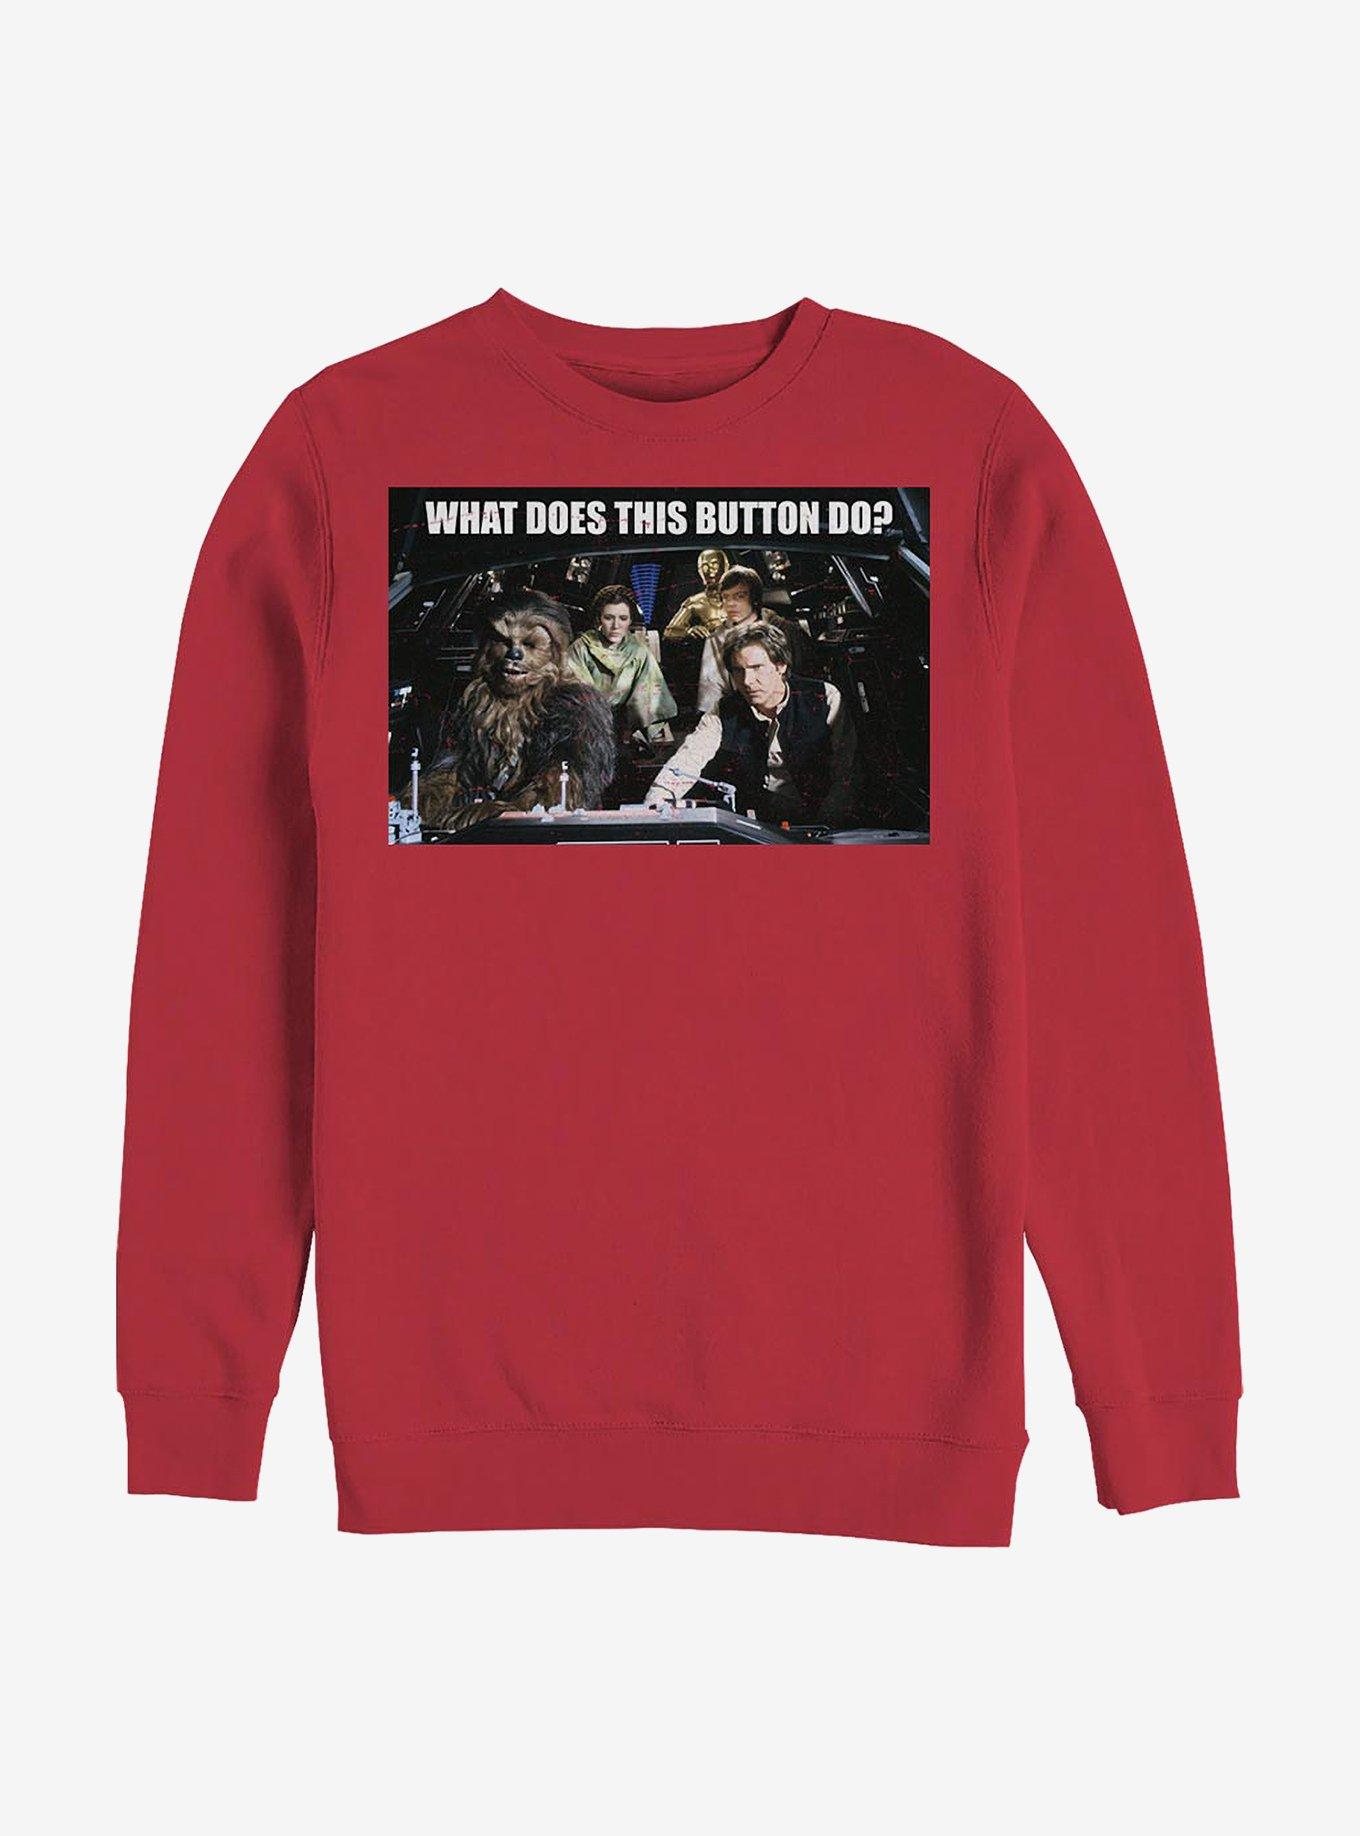 Star Wars Falcon What Does This Button Do? Crew Sweatshirt, RED, hi-res